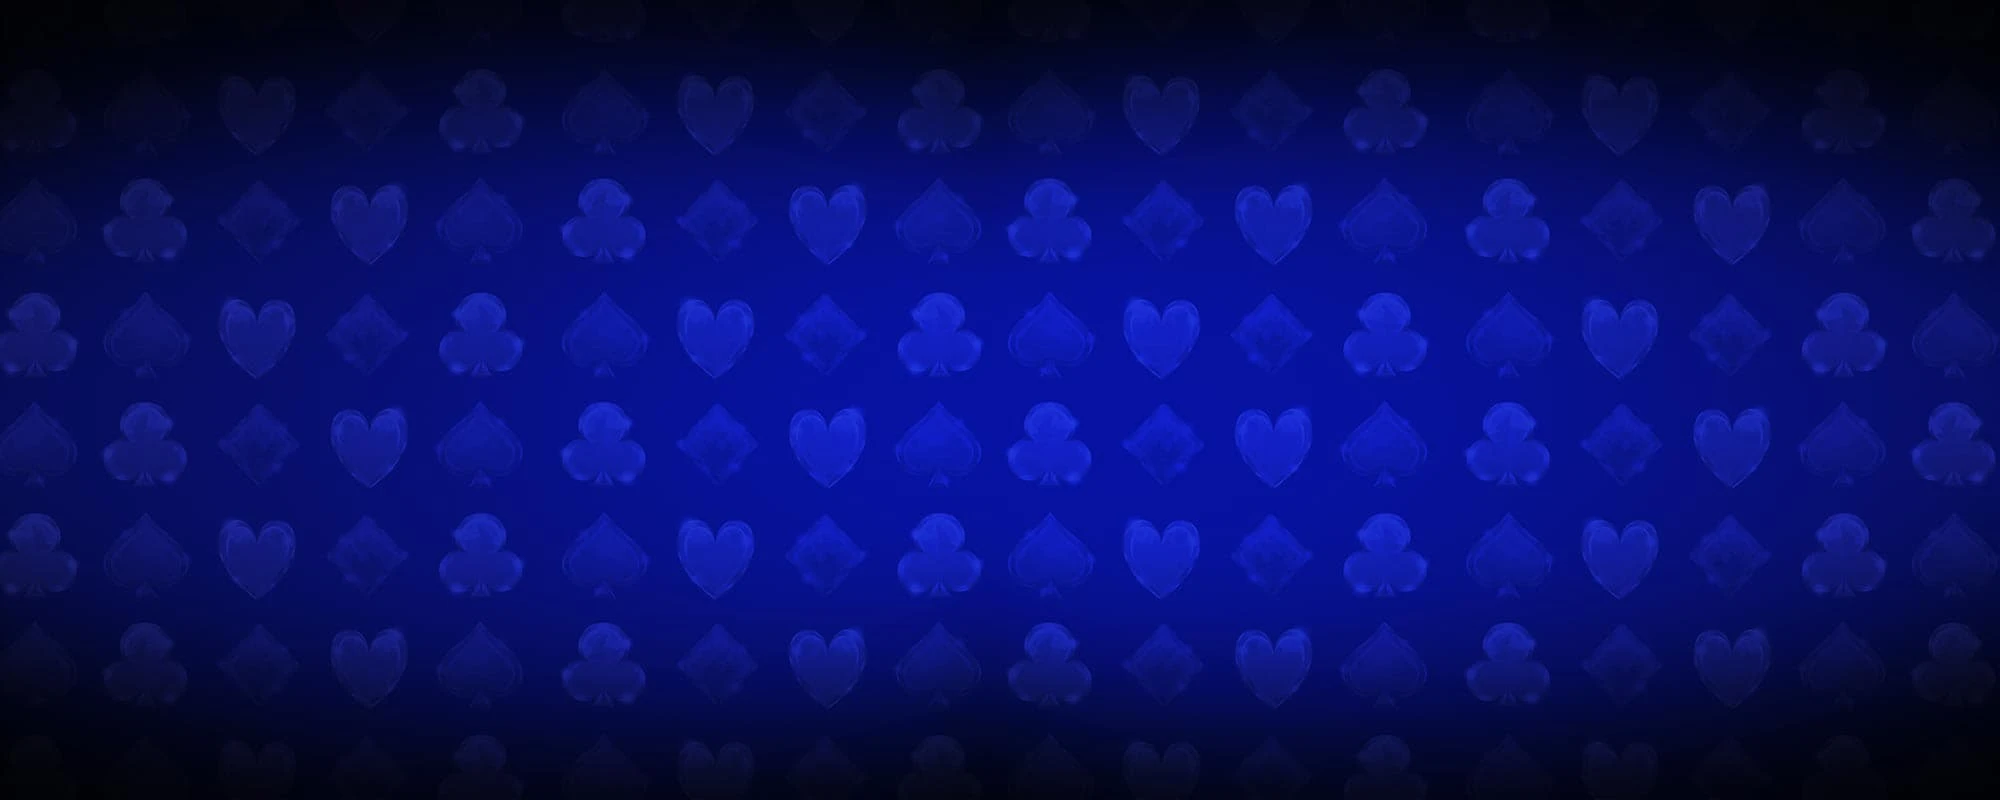 Blackjack themed background featuring card suits of hearts, diamonds, clubs and spades.